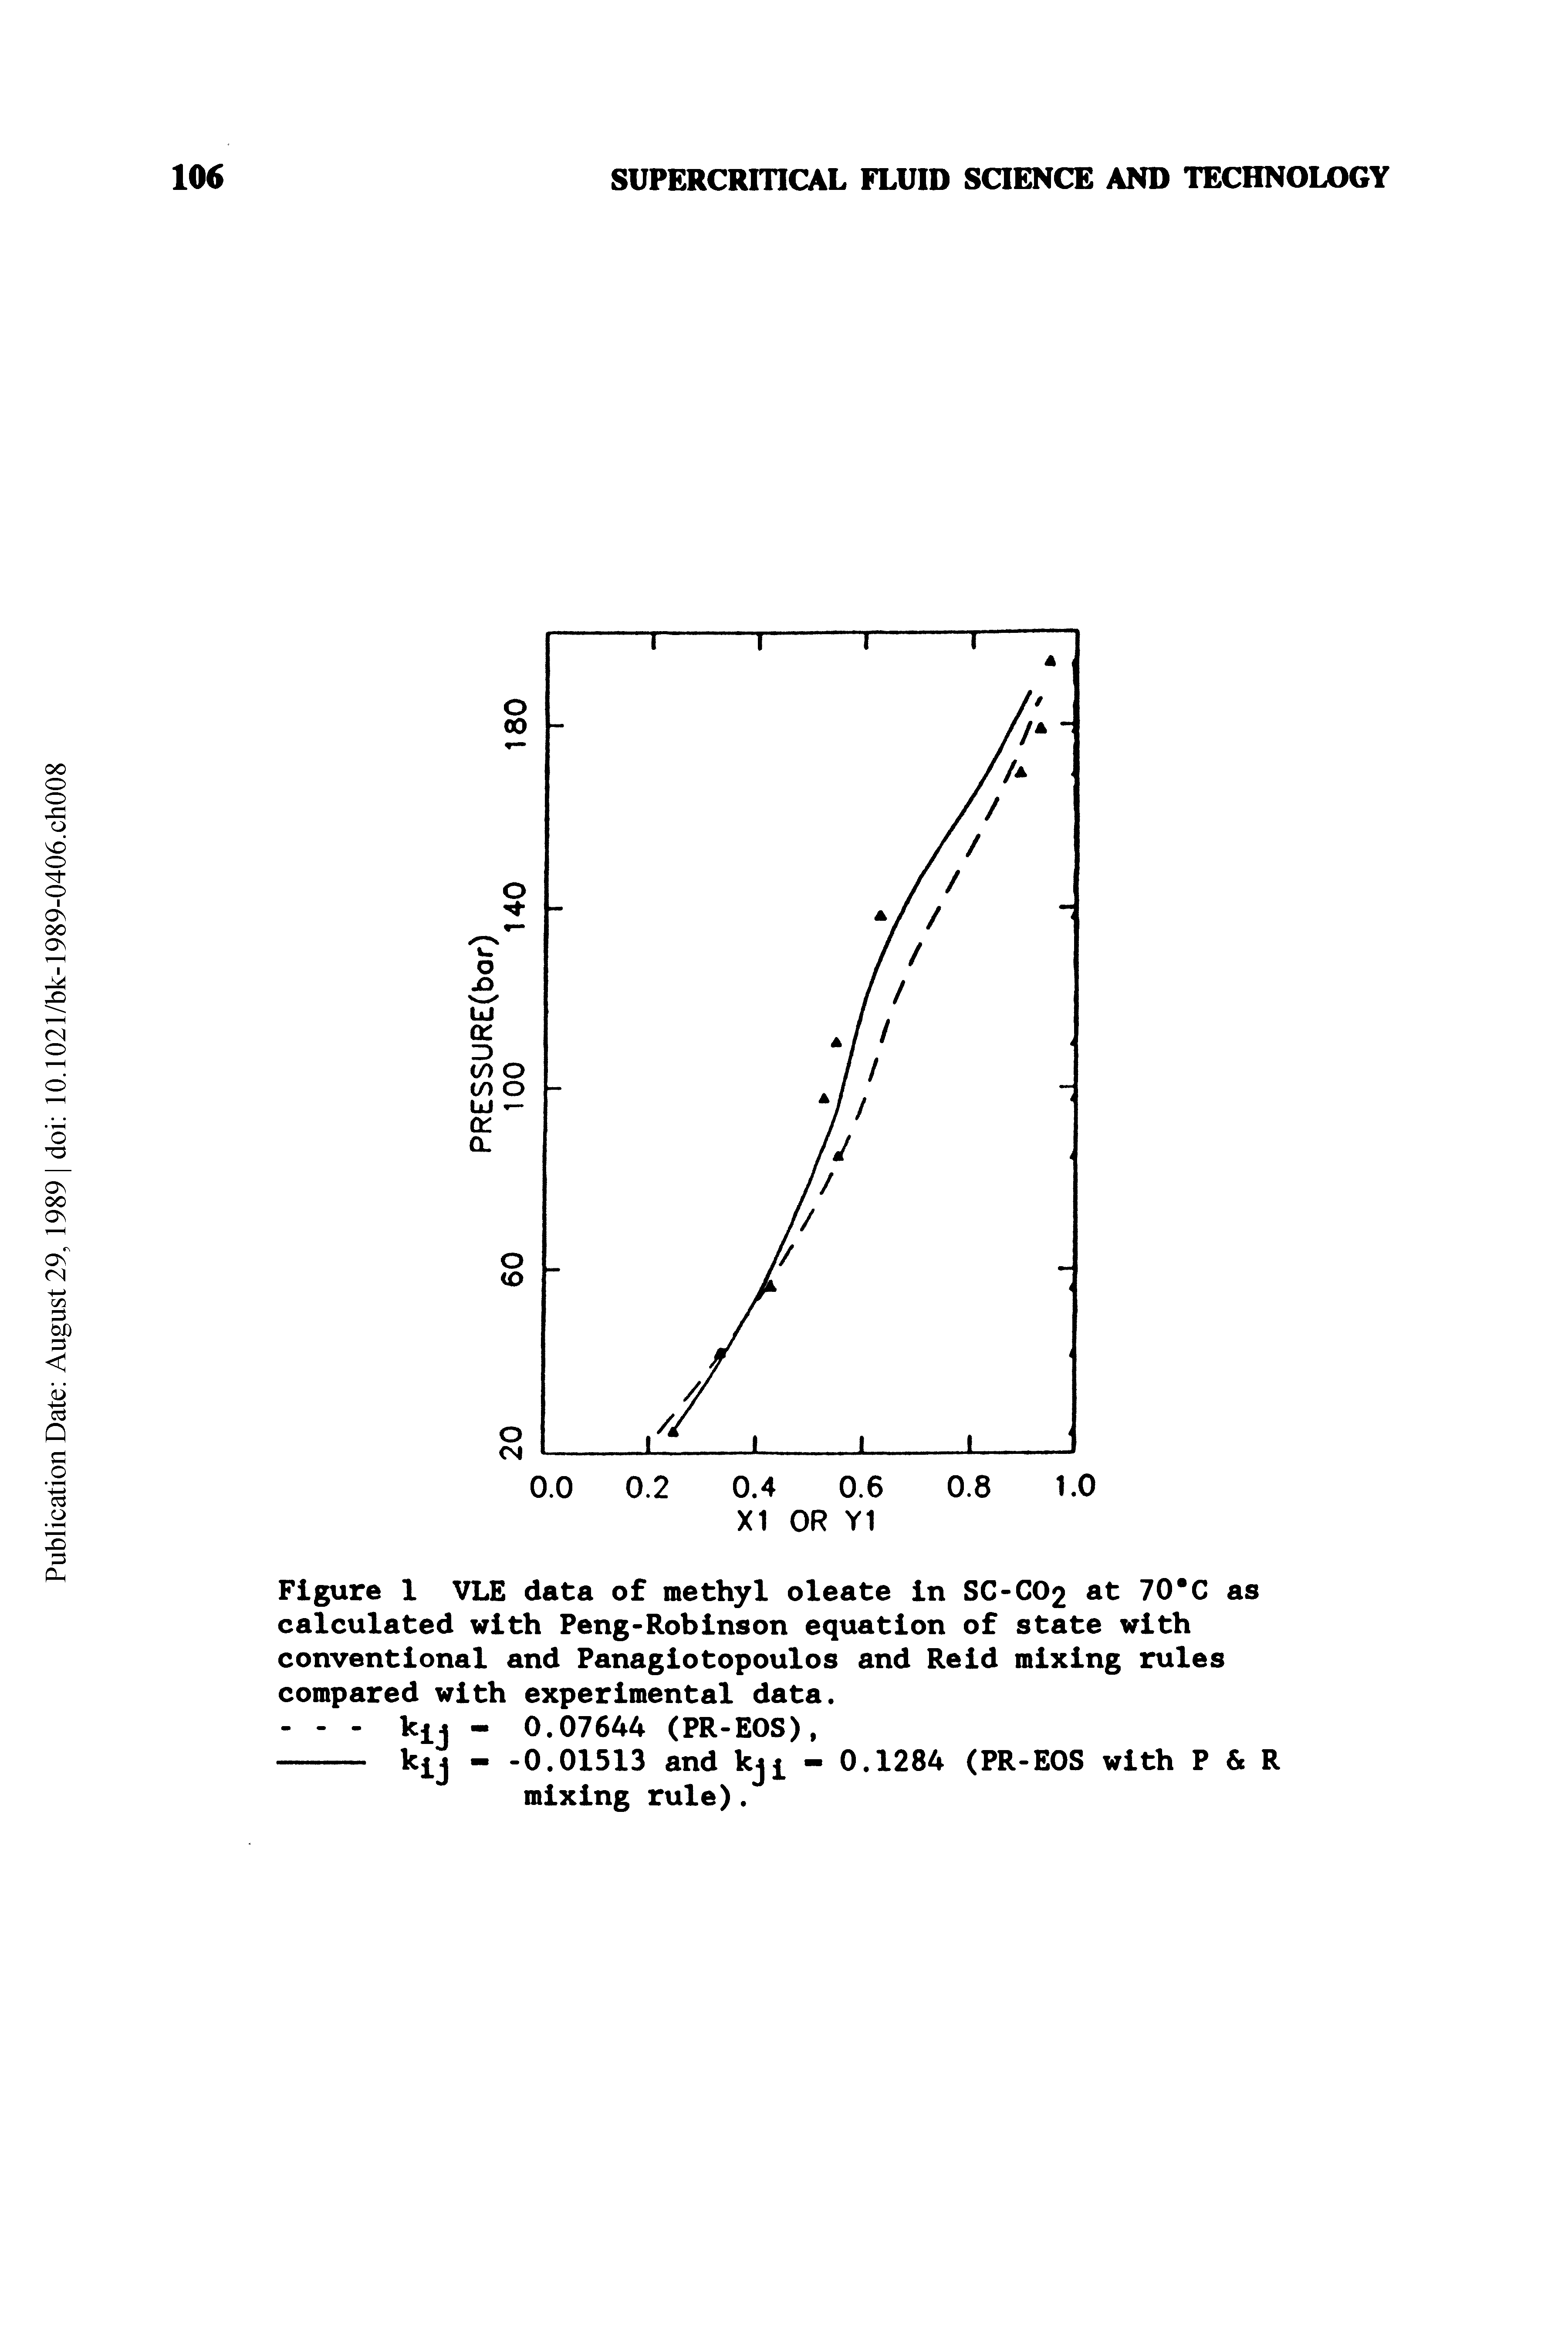 Figure 1 VLB data of methyl oleate in SC-CO2 at 70 C as calculated with Peng-Robinson equation of state with conventional and Panagiotopoulos and Reid mixing rules compared with experimental data.